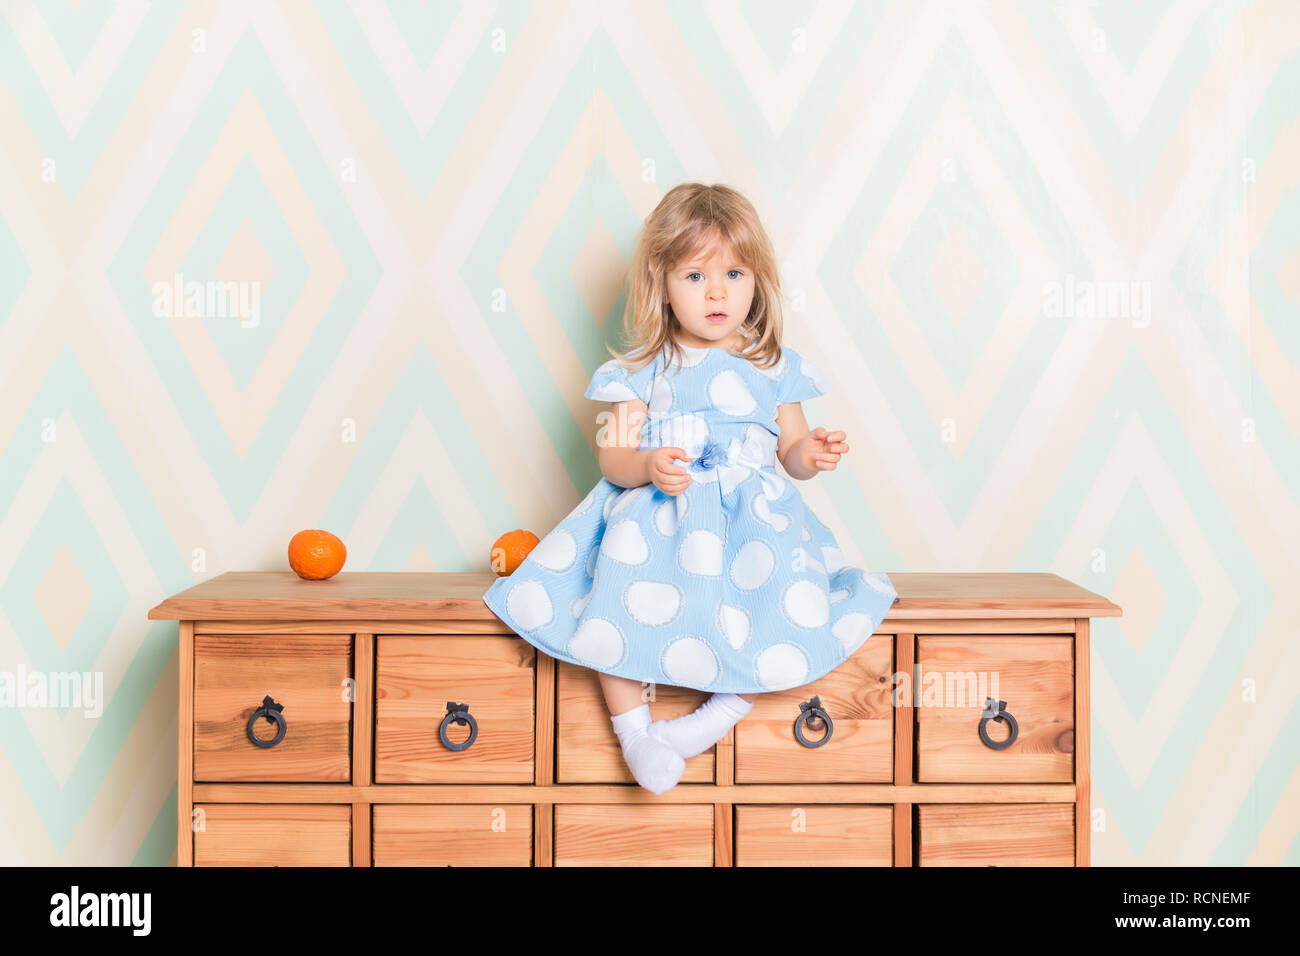 A little baby girl in her room sitting cross-legged on chest of drawers with tangerines on the rhomb wallpaper background. Child in blue polka dot dress and white socks attentively looking at camera. Stock Photo